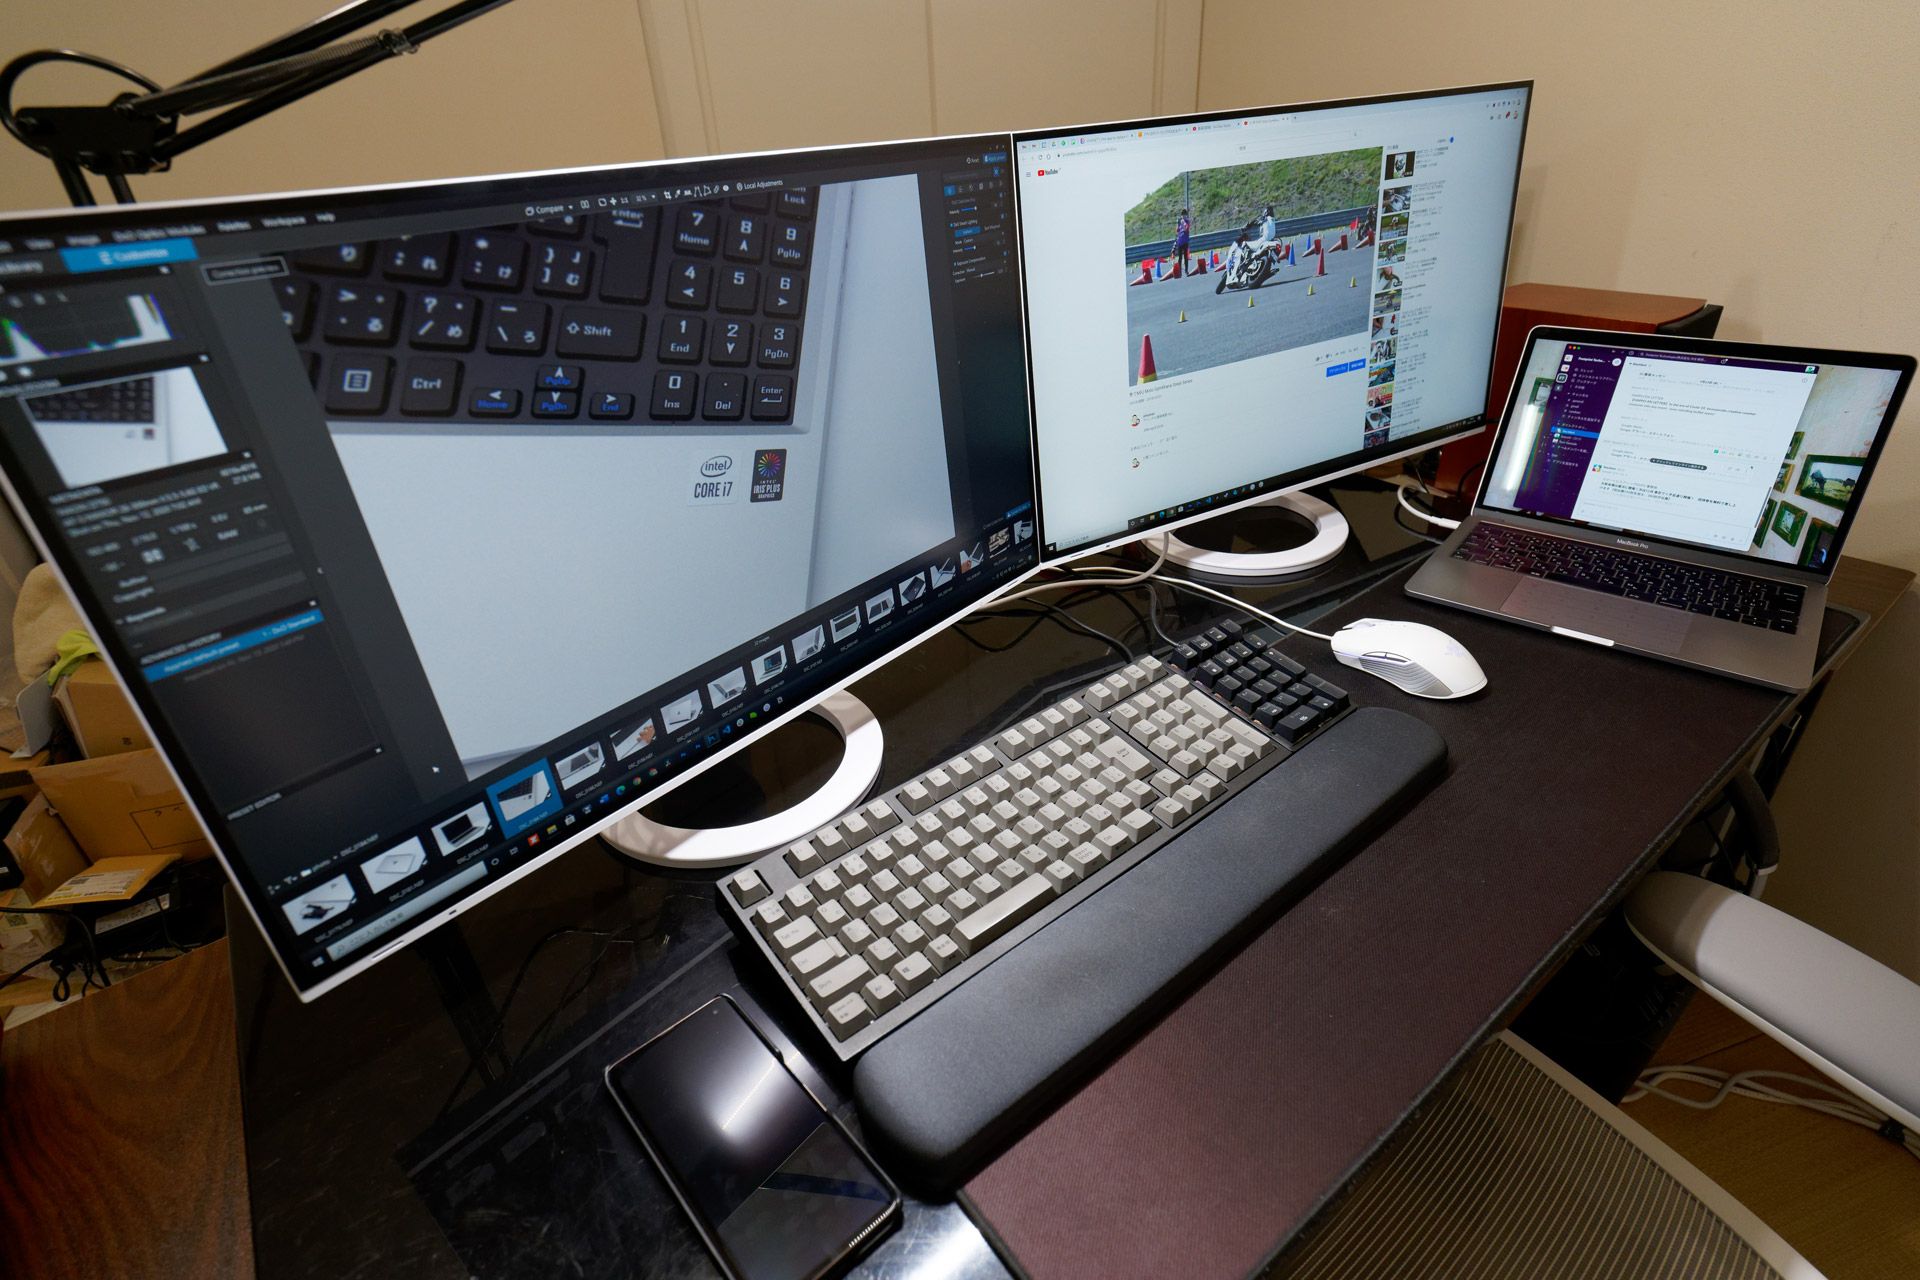 I could display the two desktop PCs and the MacBook Pro on separate monitors, but this would not allow me to share my keyboard and mouse with the second desktop PC.